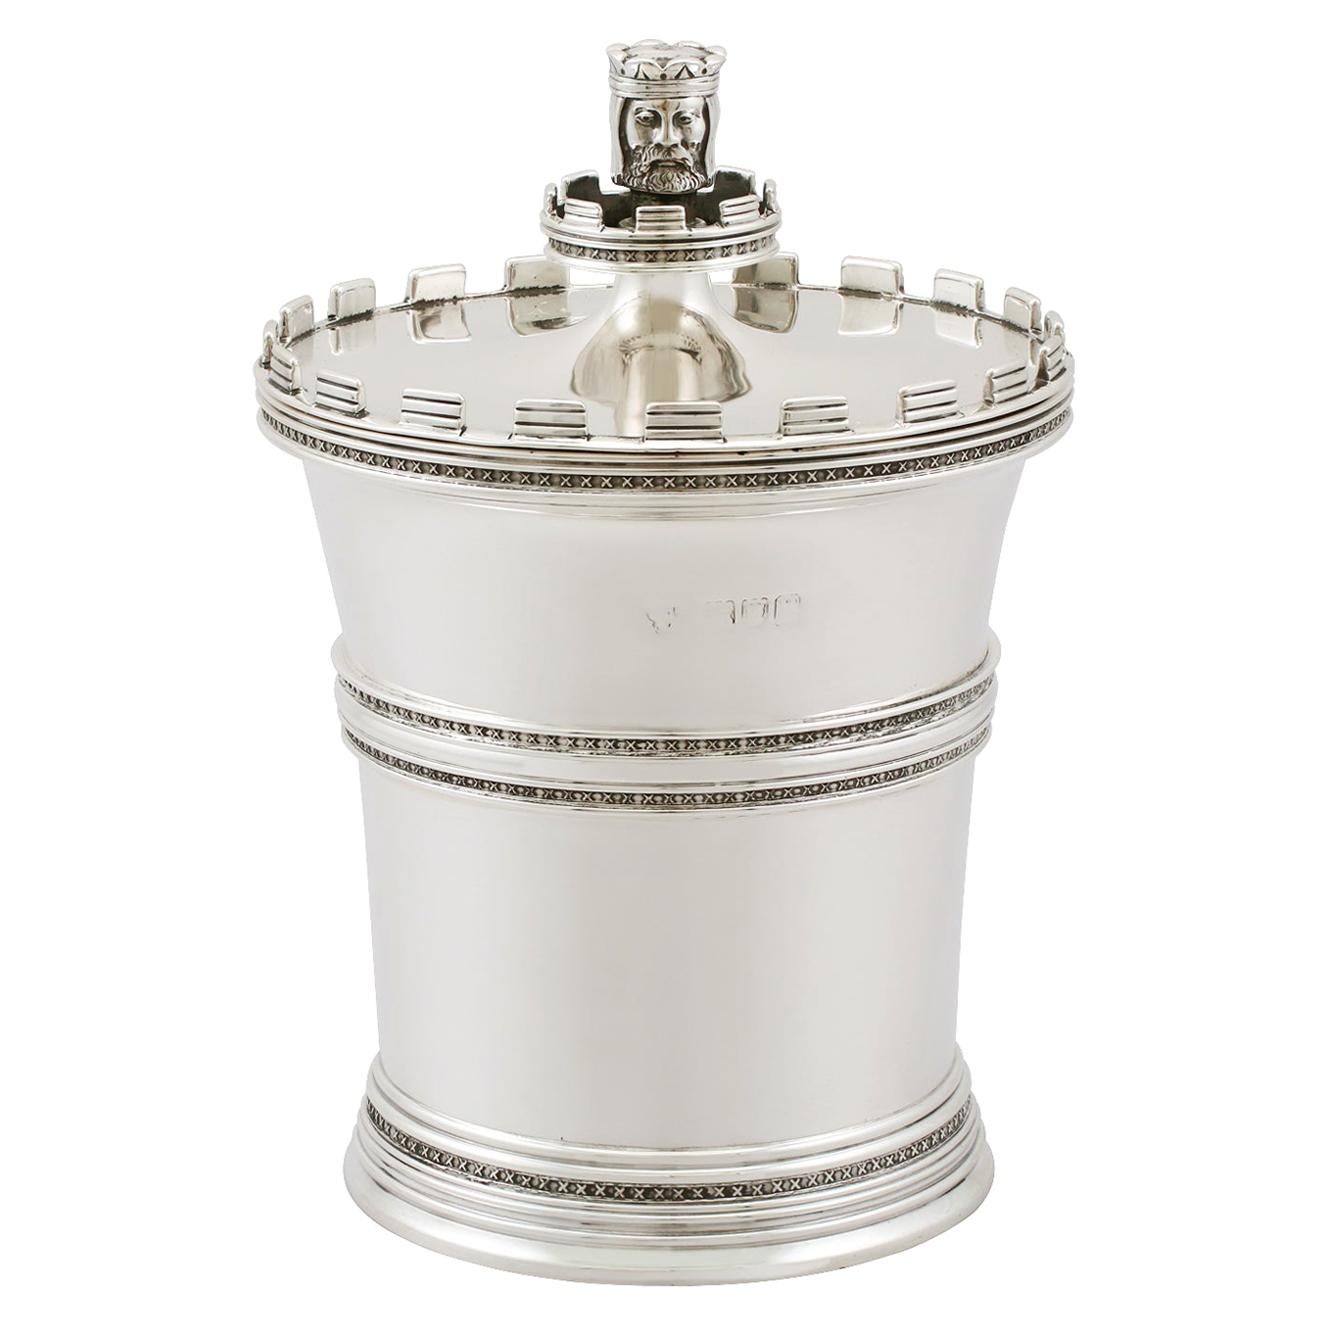 1912 Antique Sterling Silver Tea Caddy